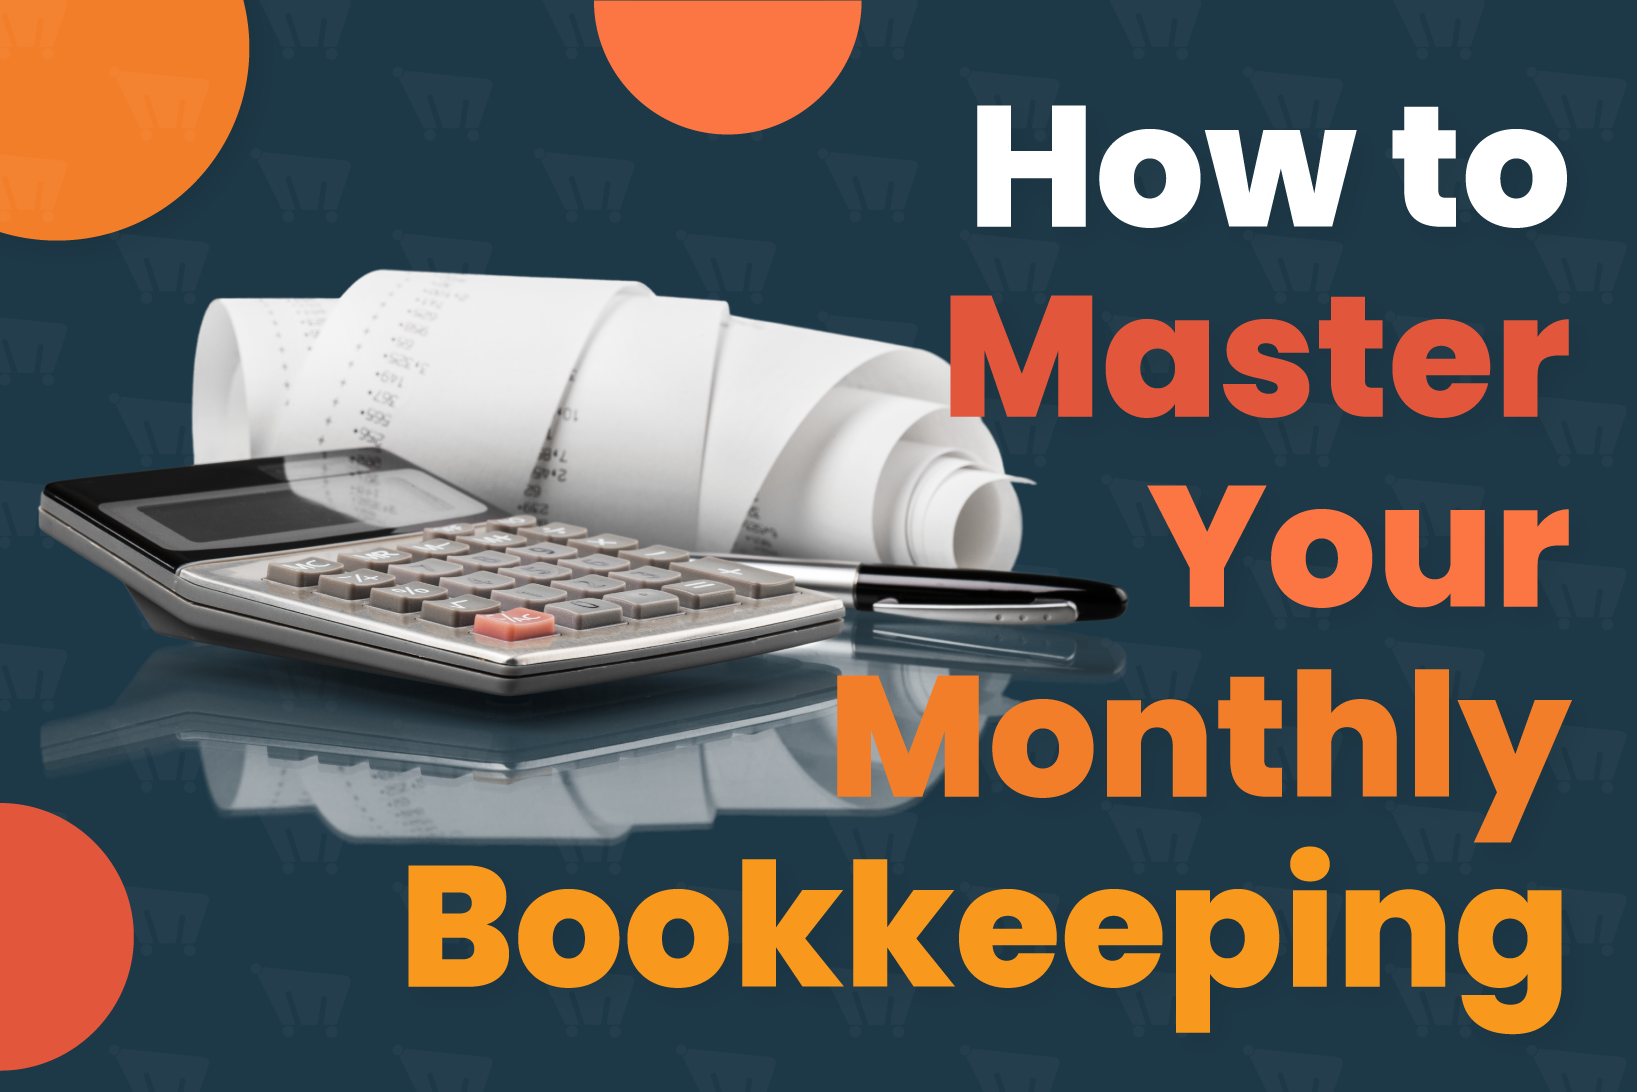 Mastering Monthly Bookkeeping for eCommerce Business Owners